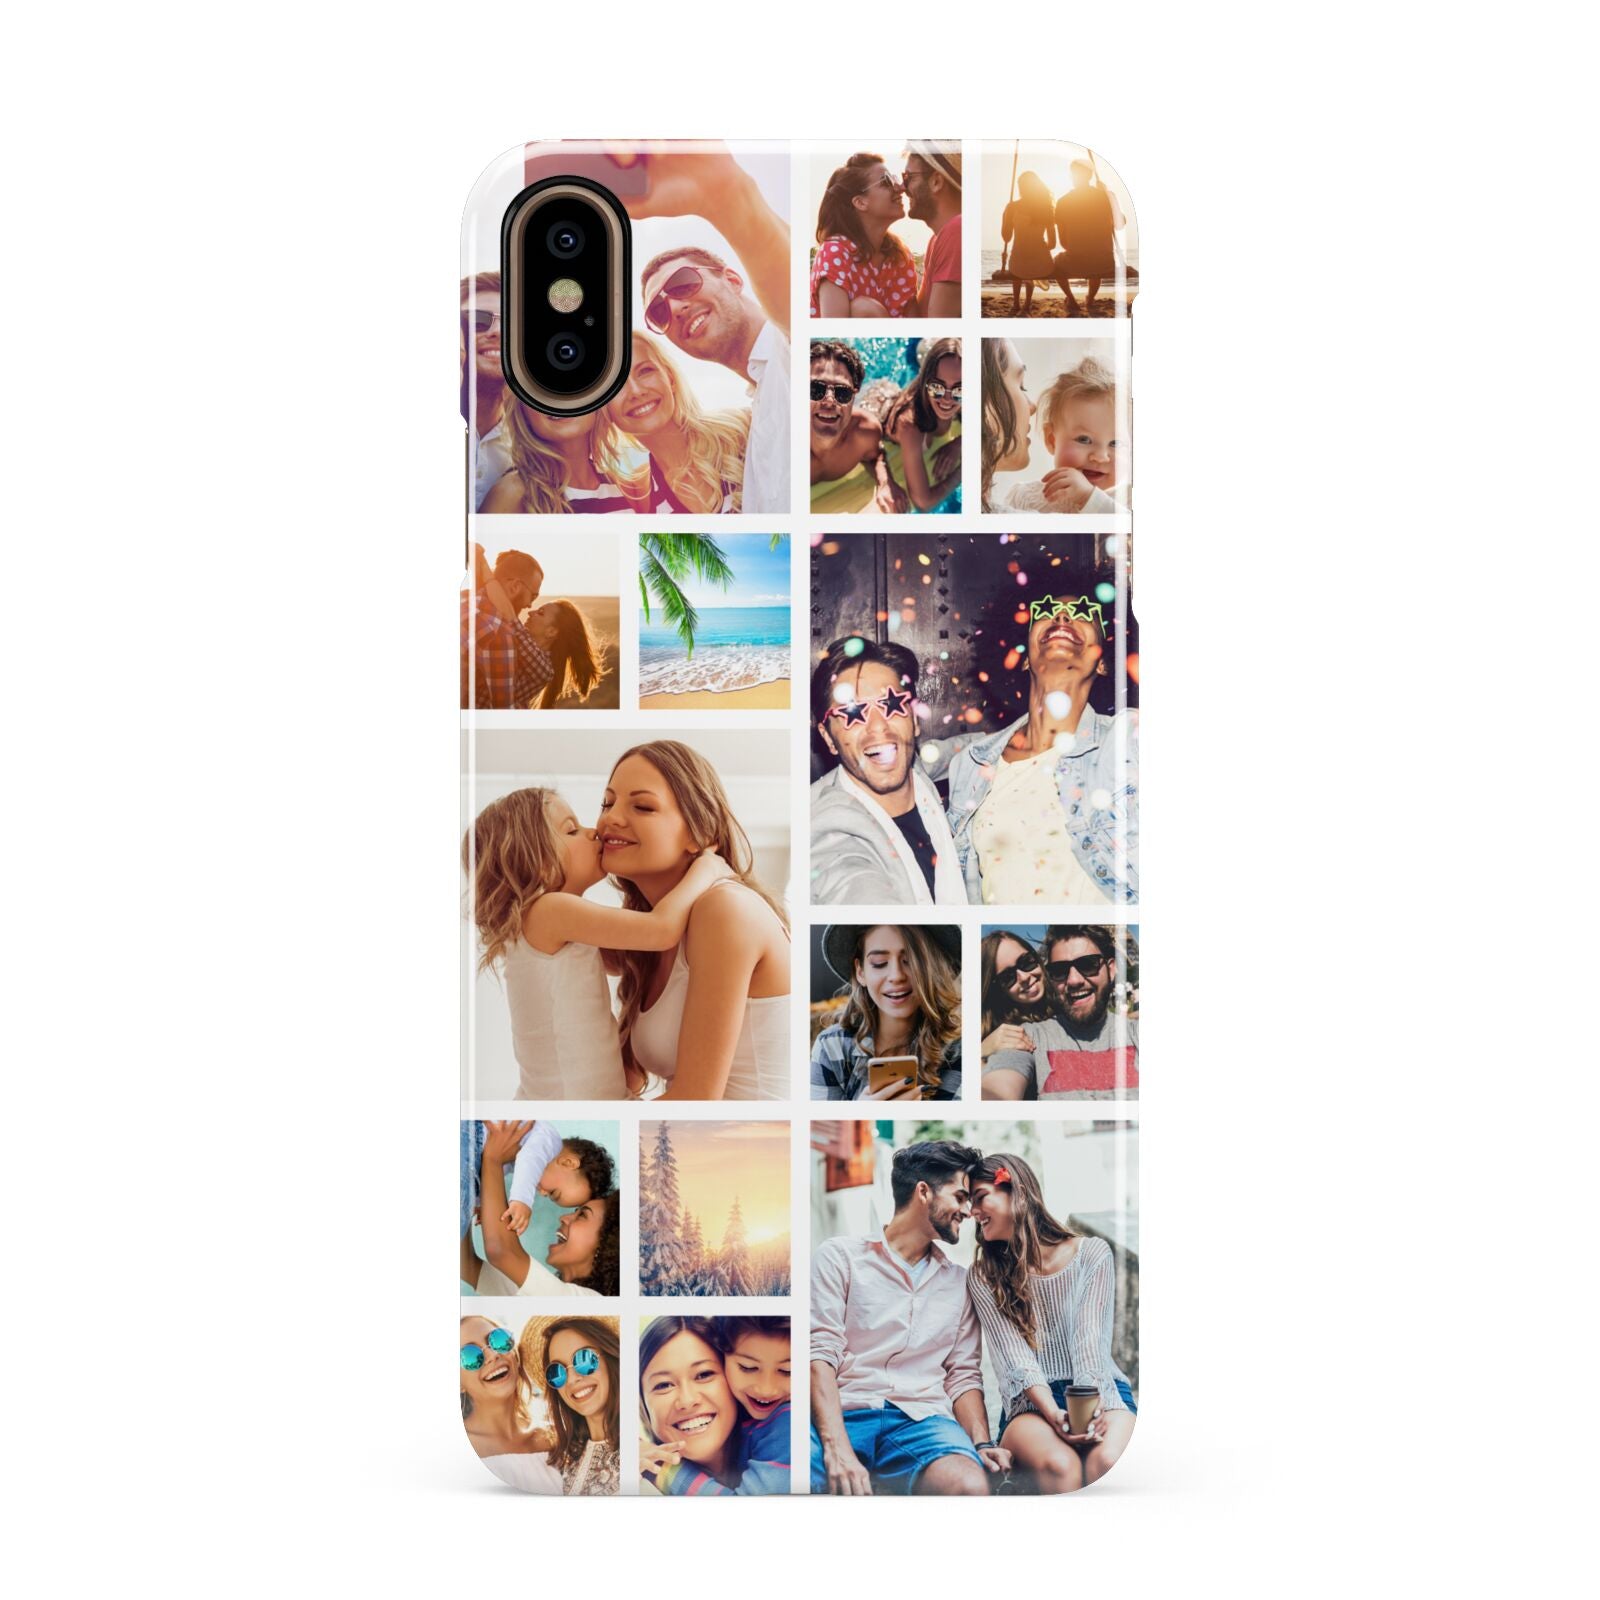 Abstract Multi Tile Photo Montage Upload Apple iPhone Xs Max 3D Snap Case